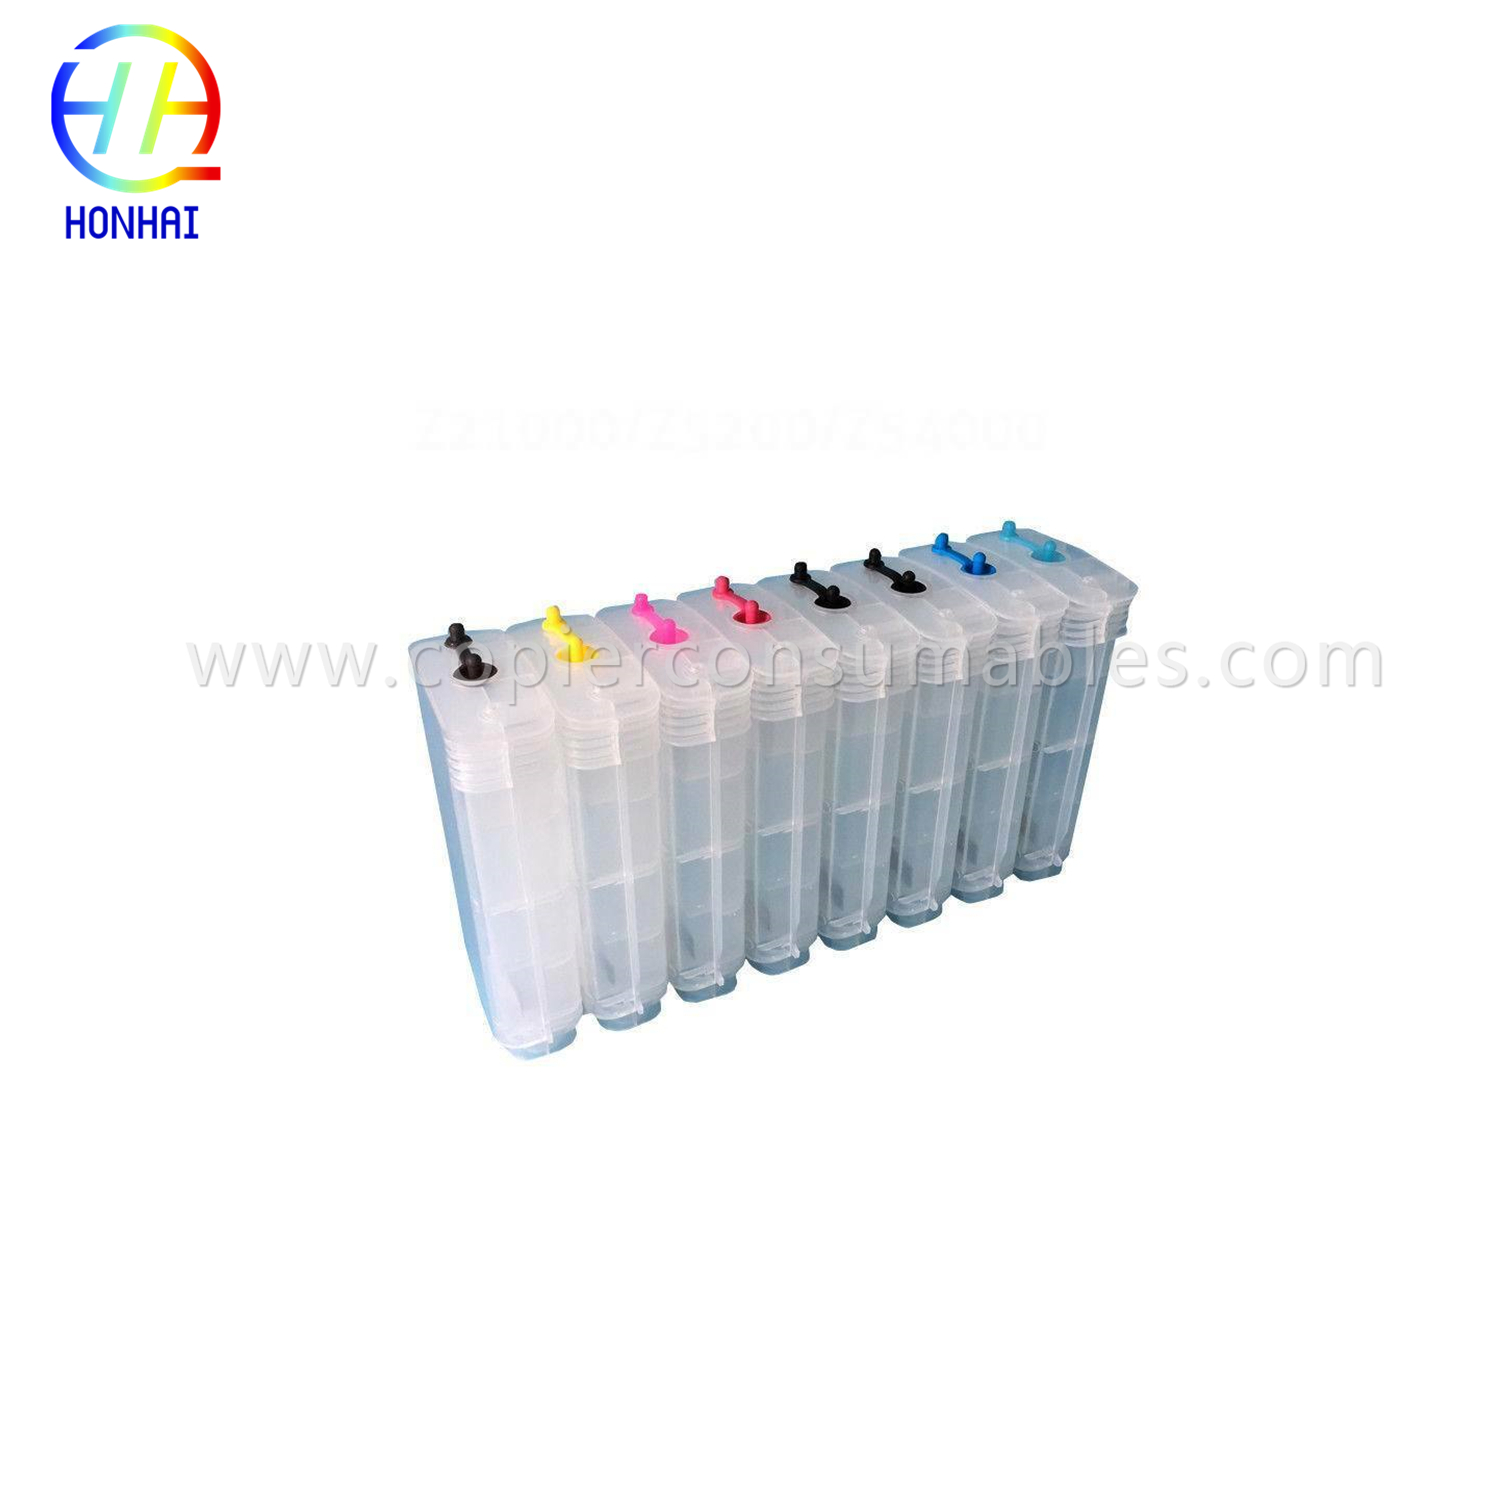 Empty Refillable Ink Cartridge for HP 70# Z3100